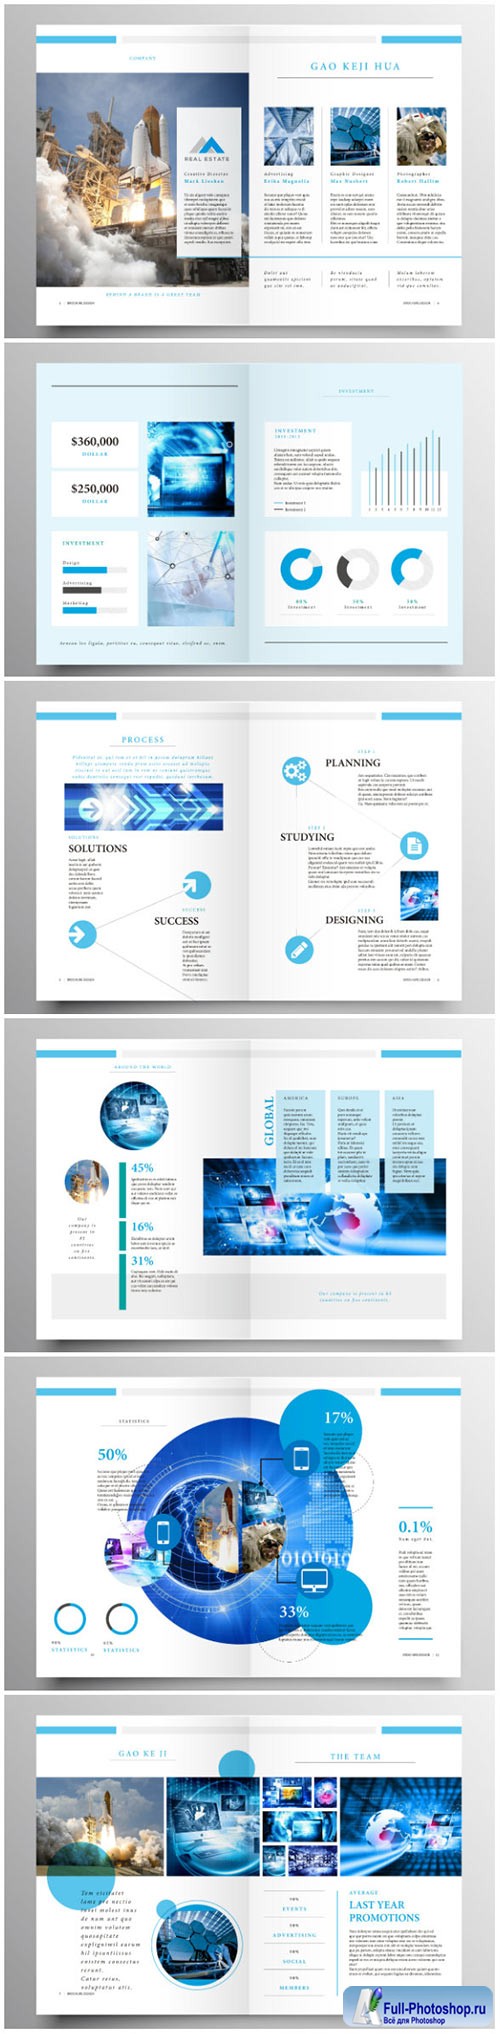 Brochure template vector layout design, corporate business annual report, magazine, flyer mockup # 200